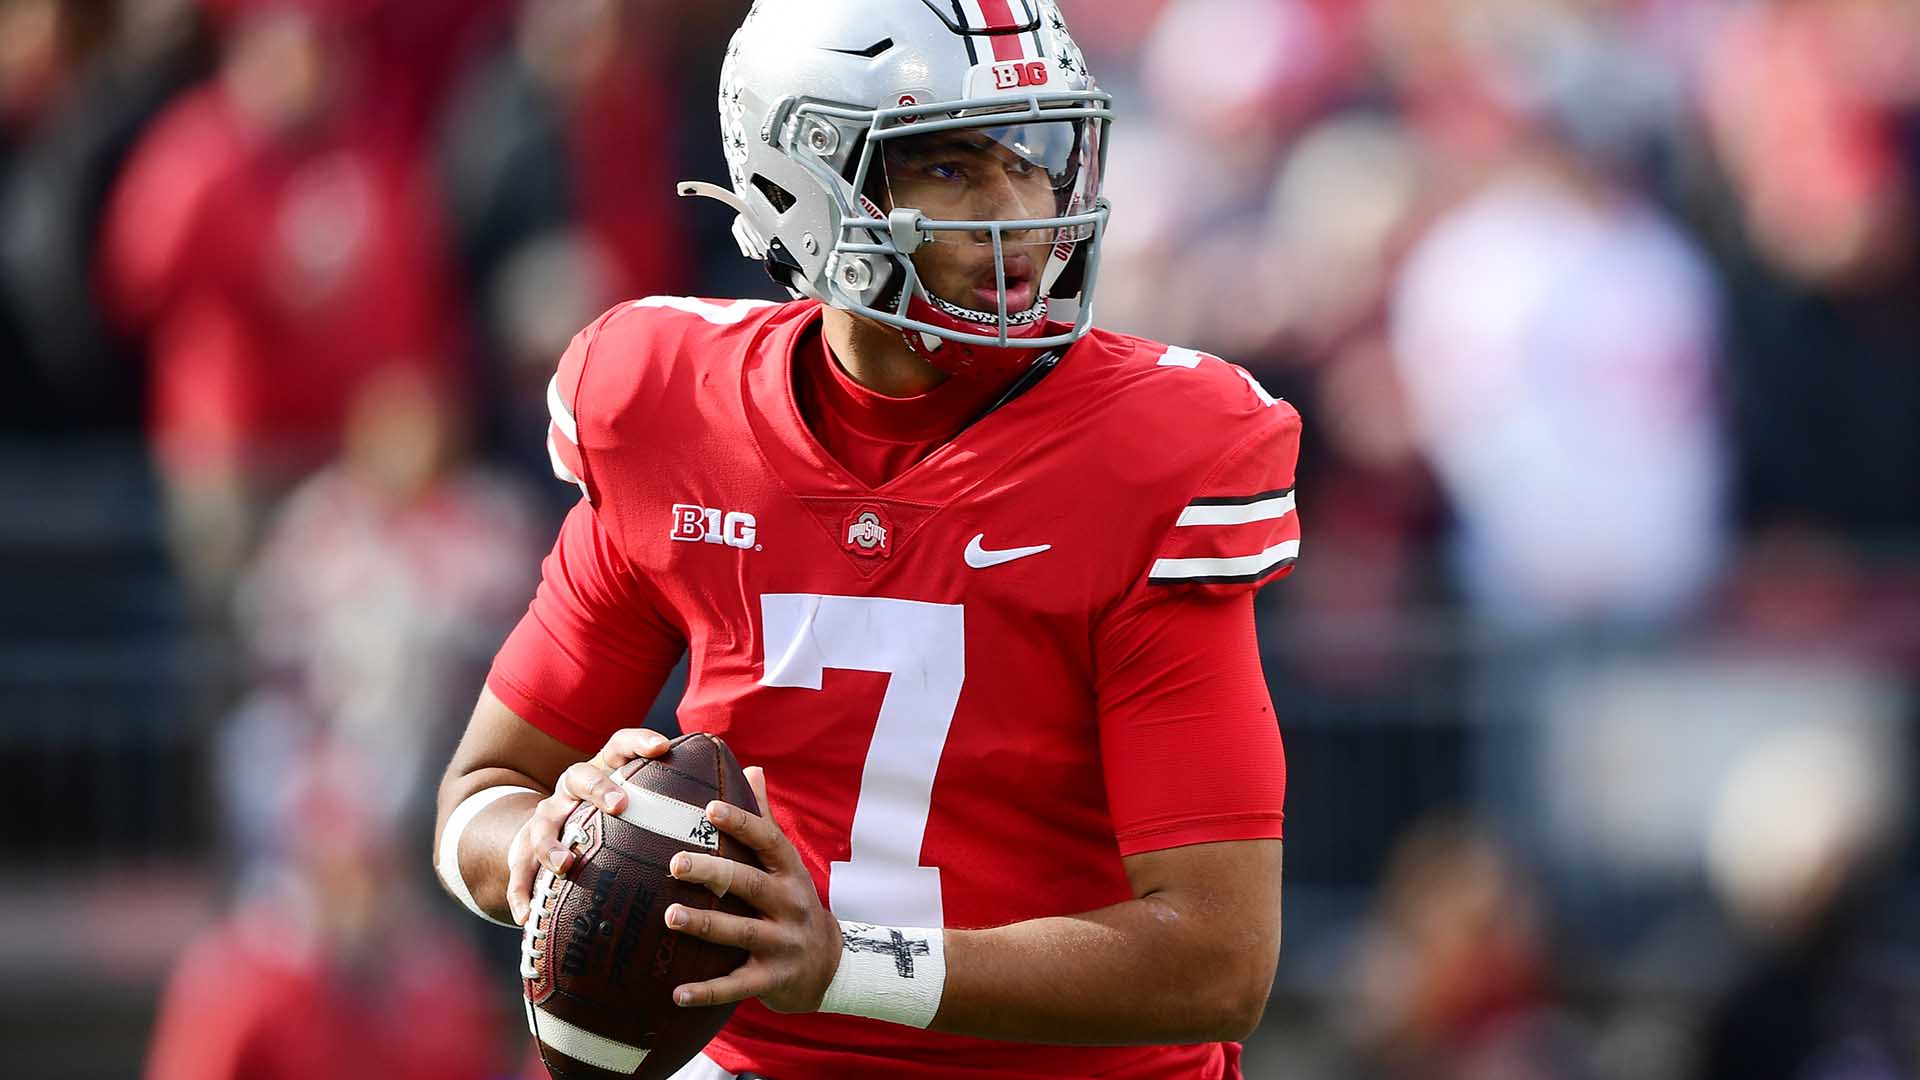 Ohio State's C.J. Stroud is Big Ten offensive player of the year Sports College Football